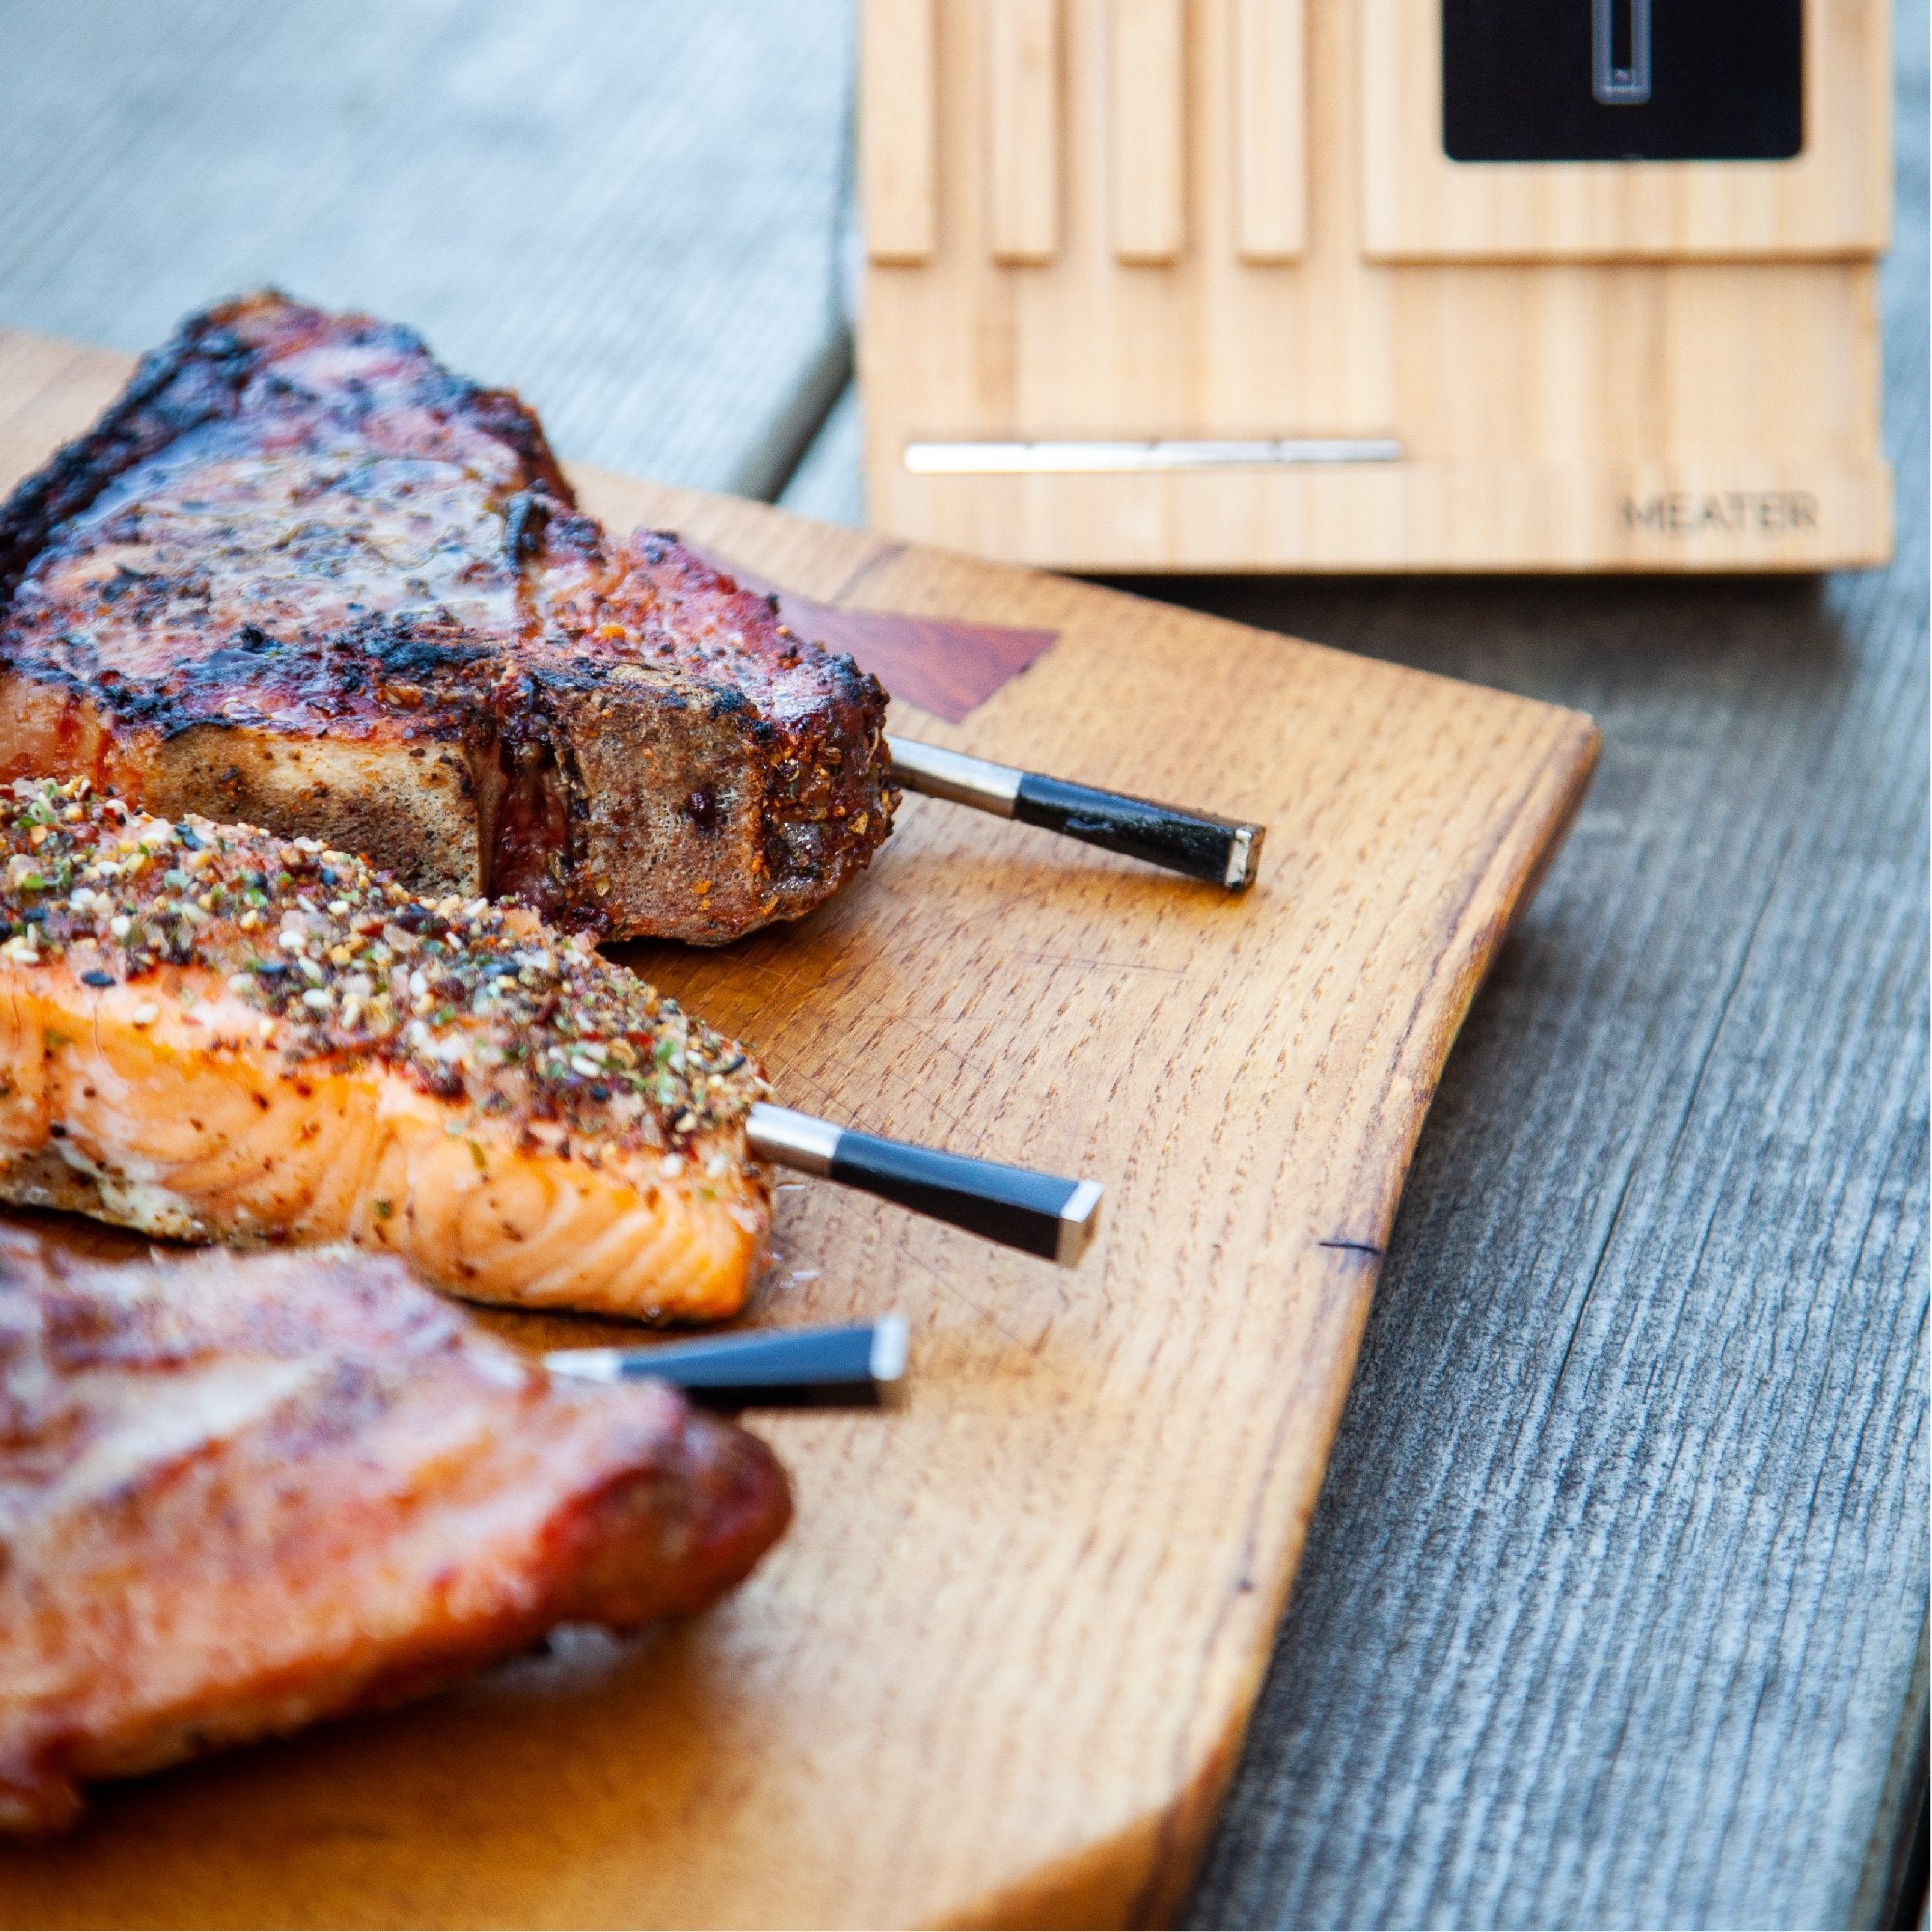 MEATER Block Premium Meat Thermometer 